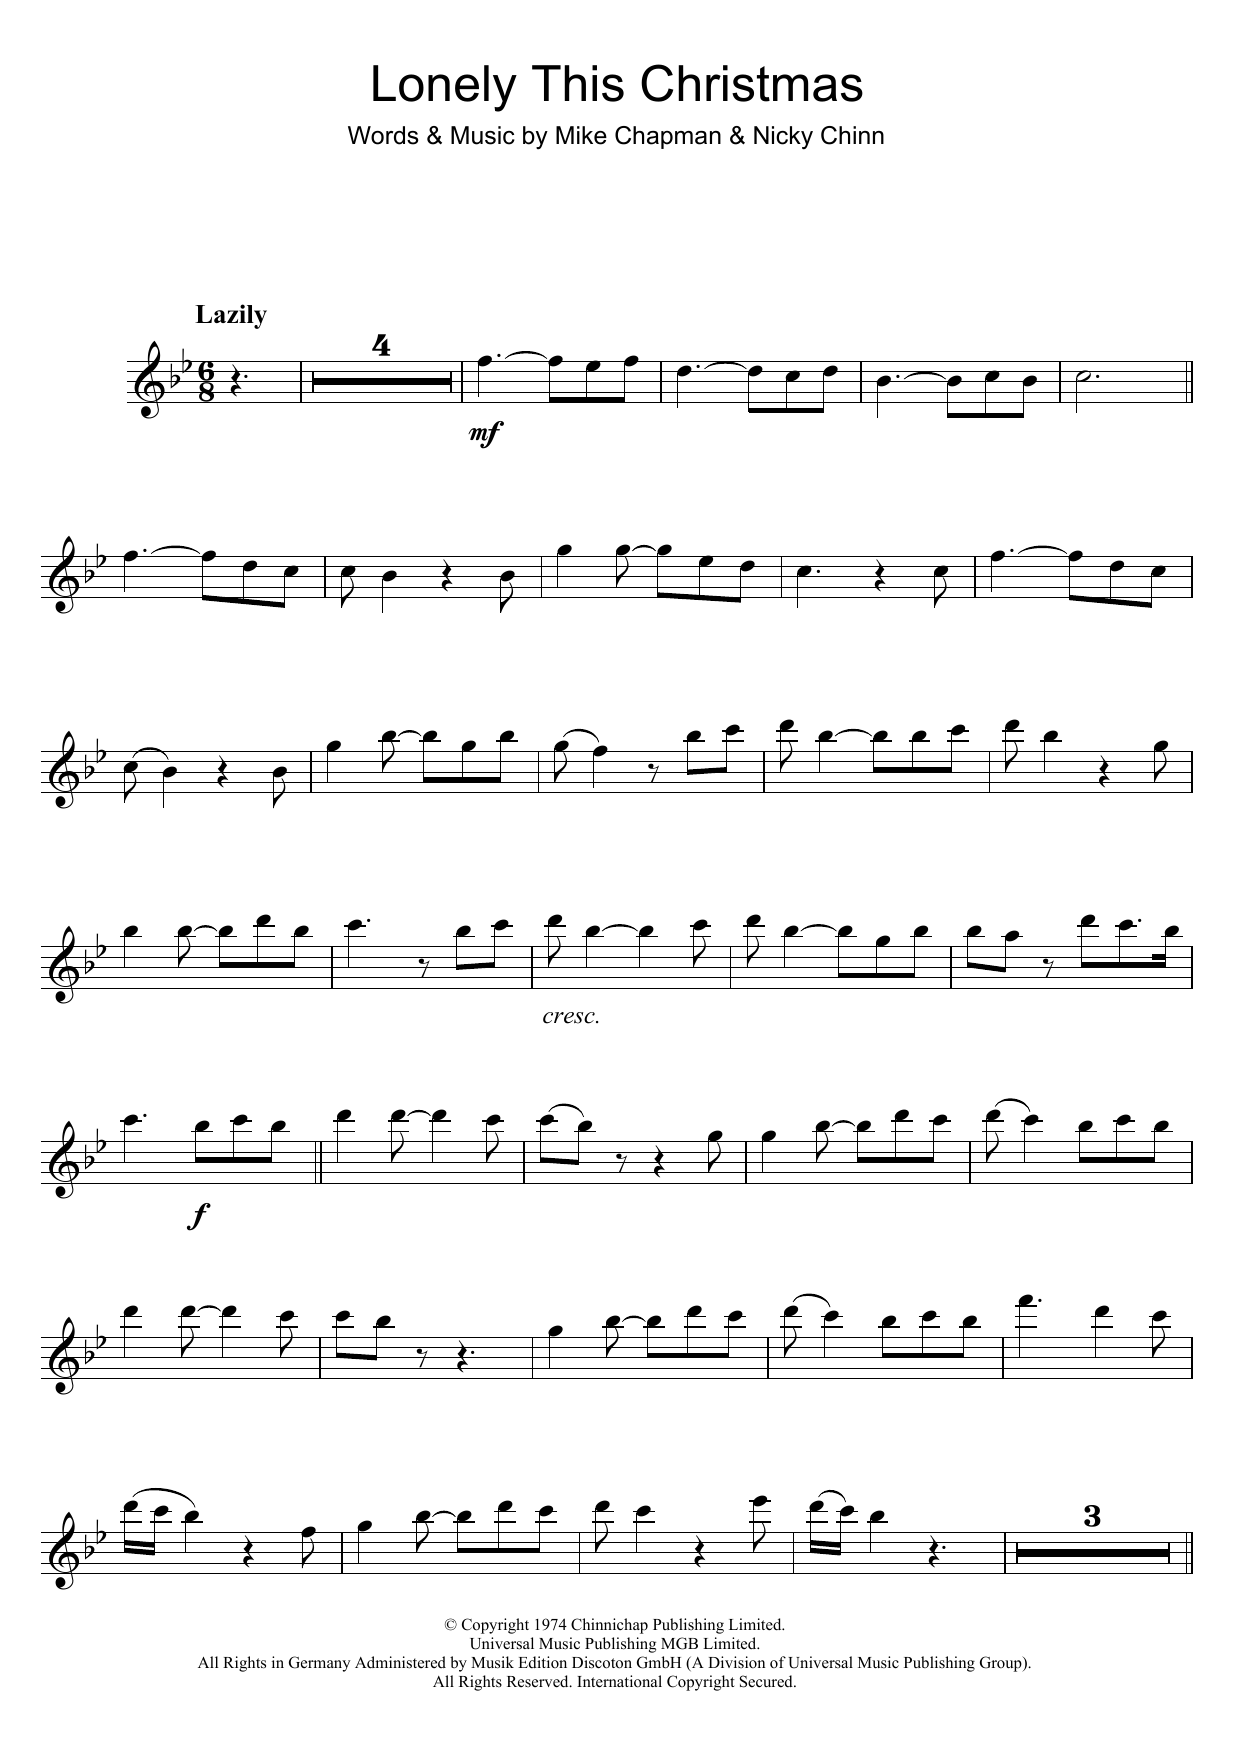 Download Mud Lonely This Christmas Sheet Music